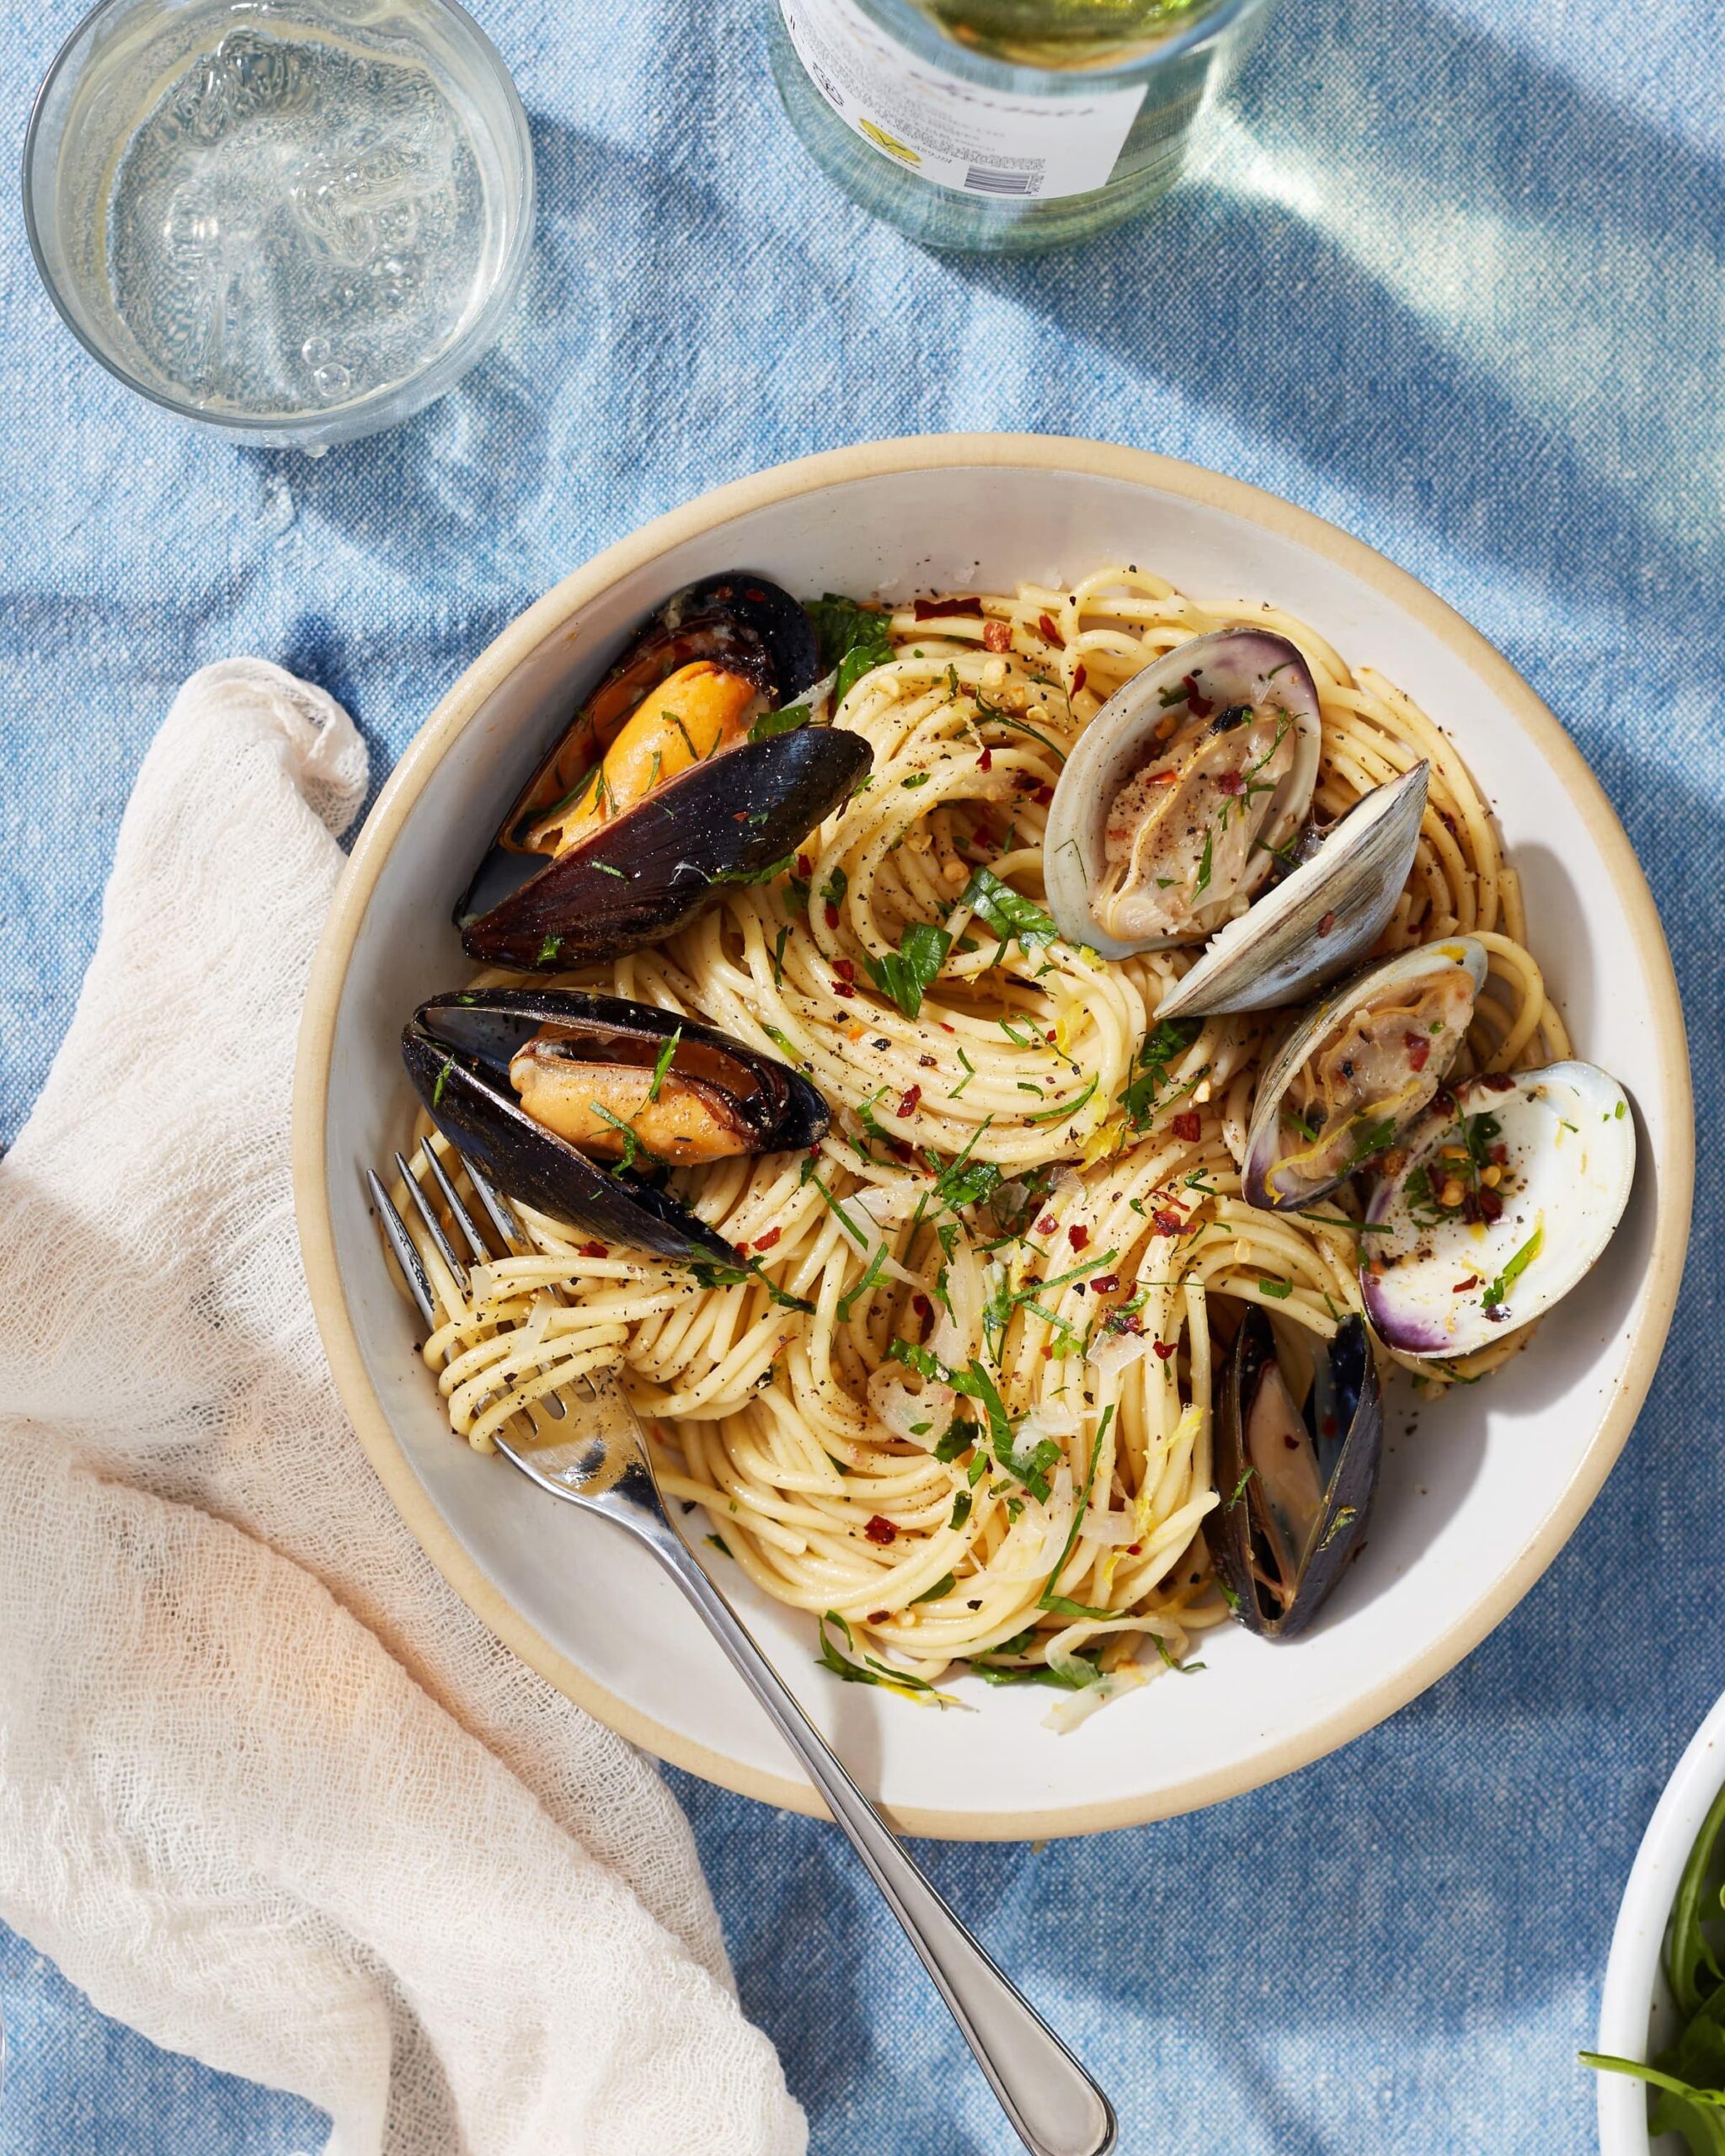  Step up your spaghetti game by adding mussels and white wine into the mix.